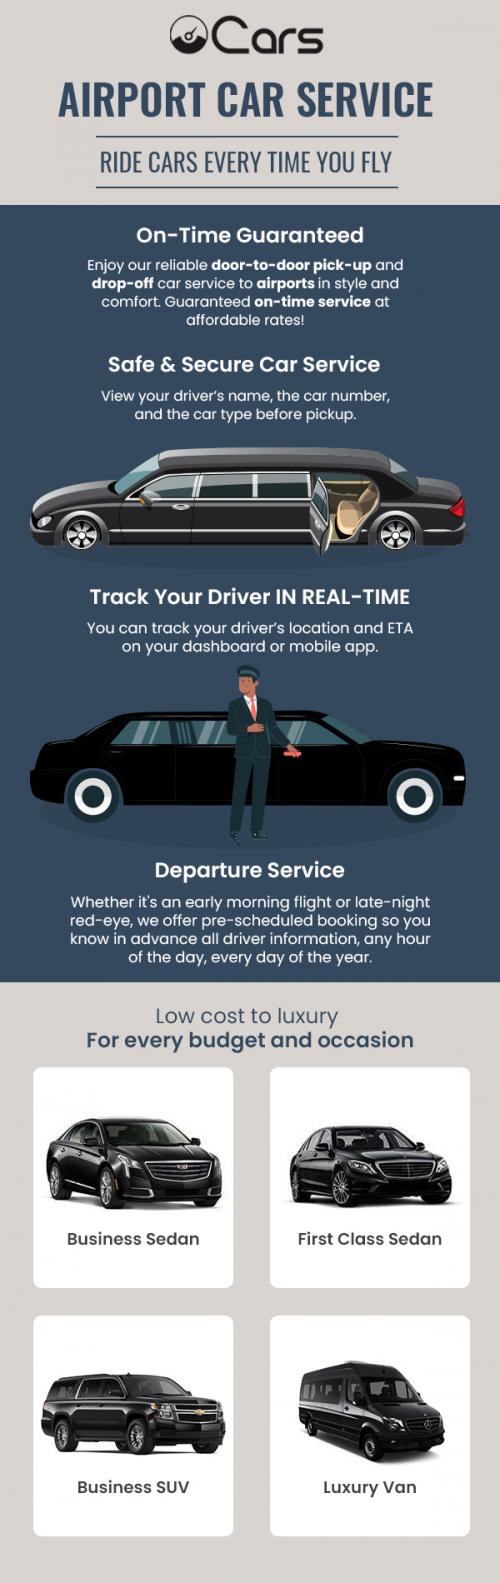 Get the Best Airport Transportation Service from Cars